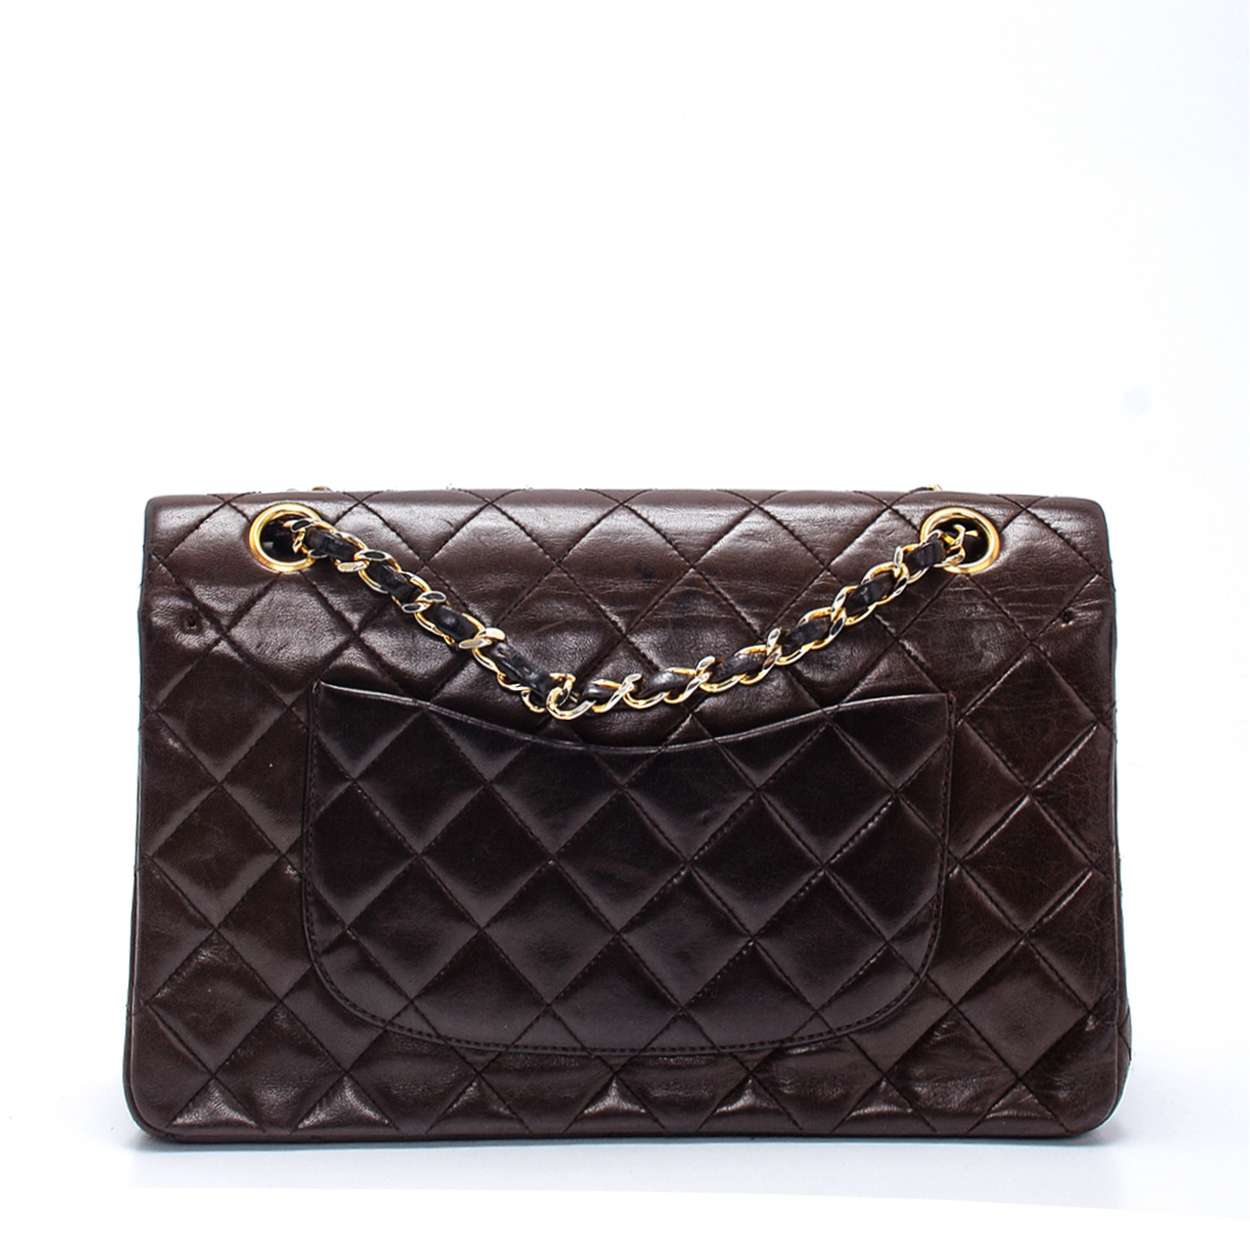 Chanel - Brown Quilted Lambskin Leather Vintage 2.55 Double Flap Bag 